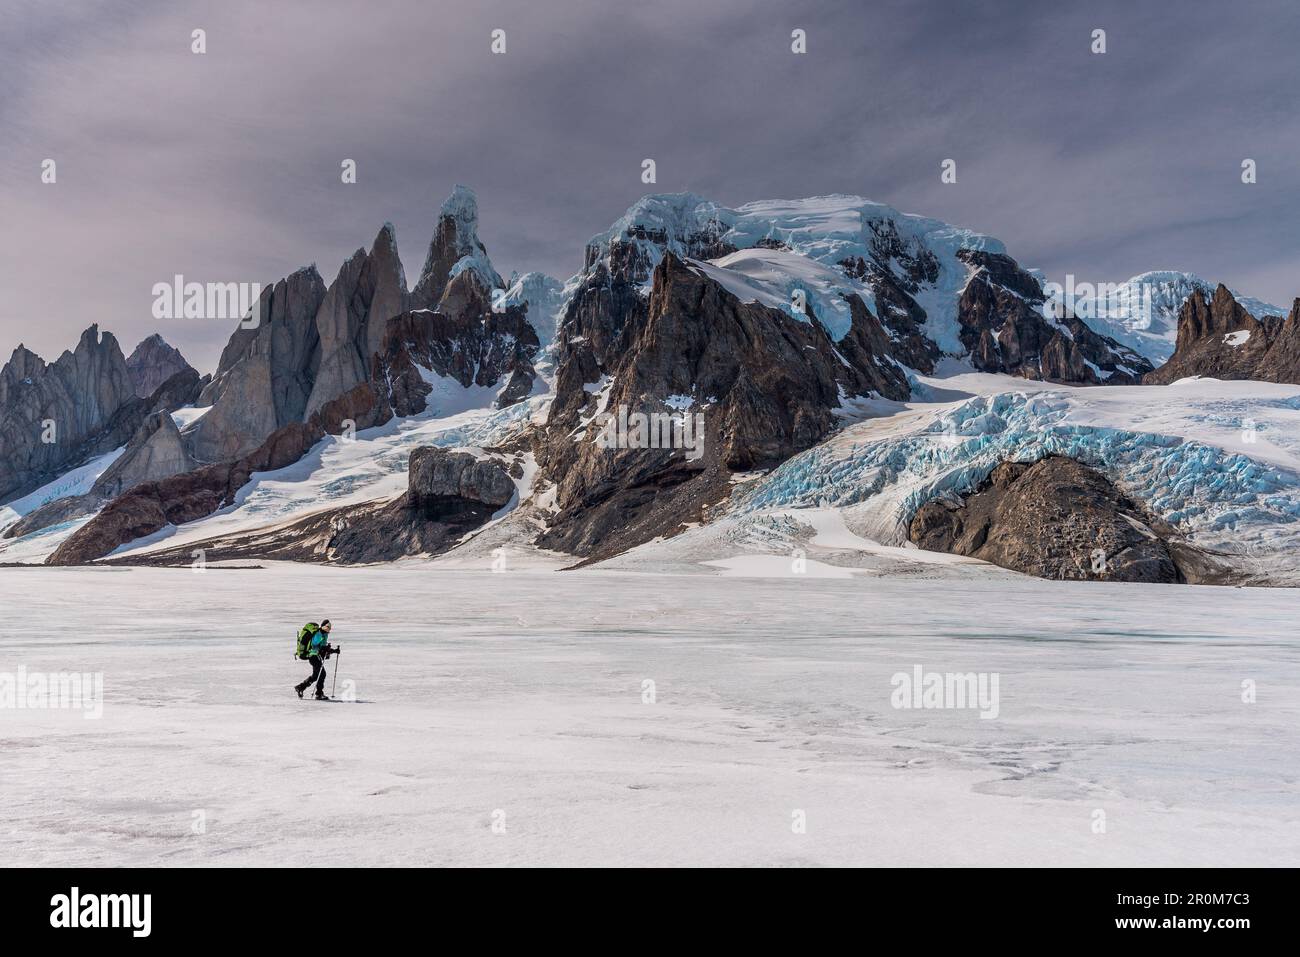 Climber on ice surface of the Campo de Hielo Sur, Cerro Torre in the background, Los Glaciares National Park, Patagonia, Argentina Stock Photo